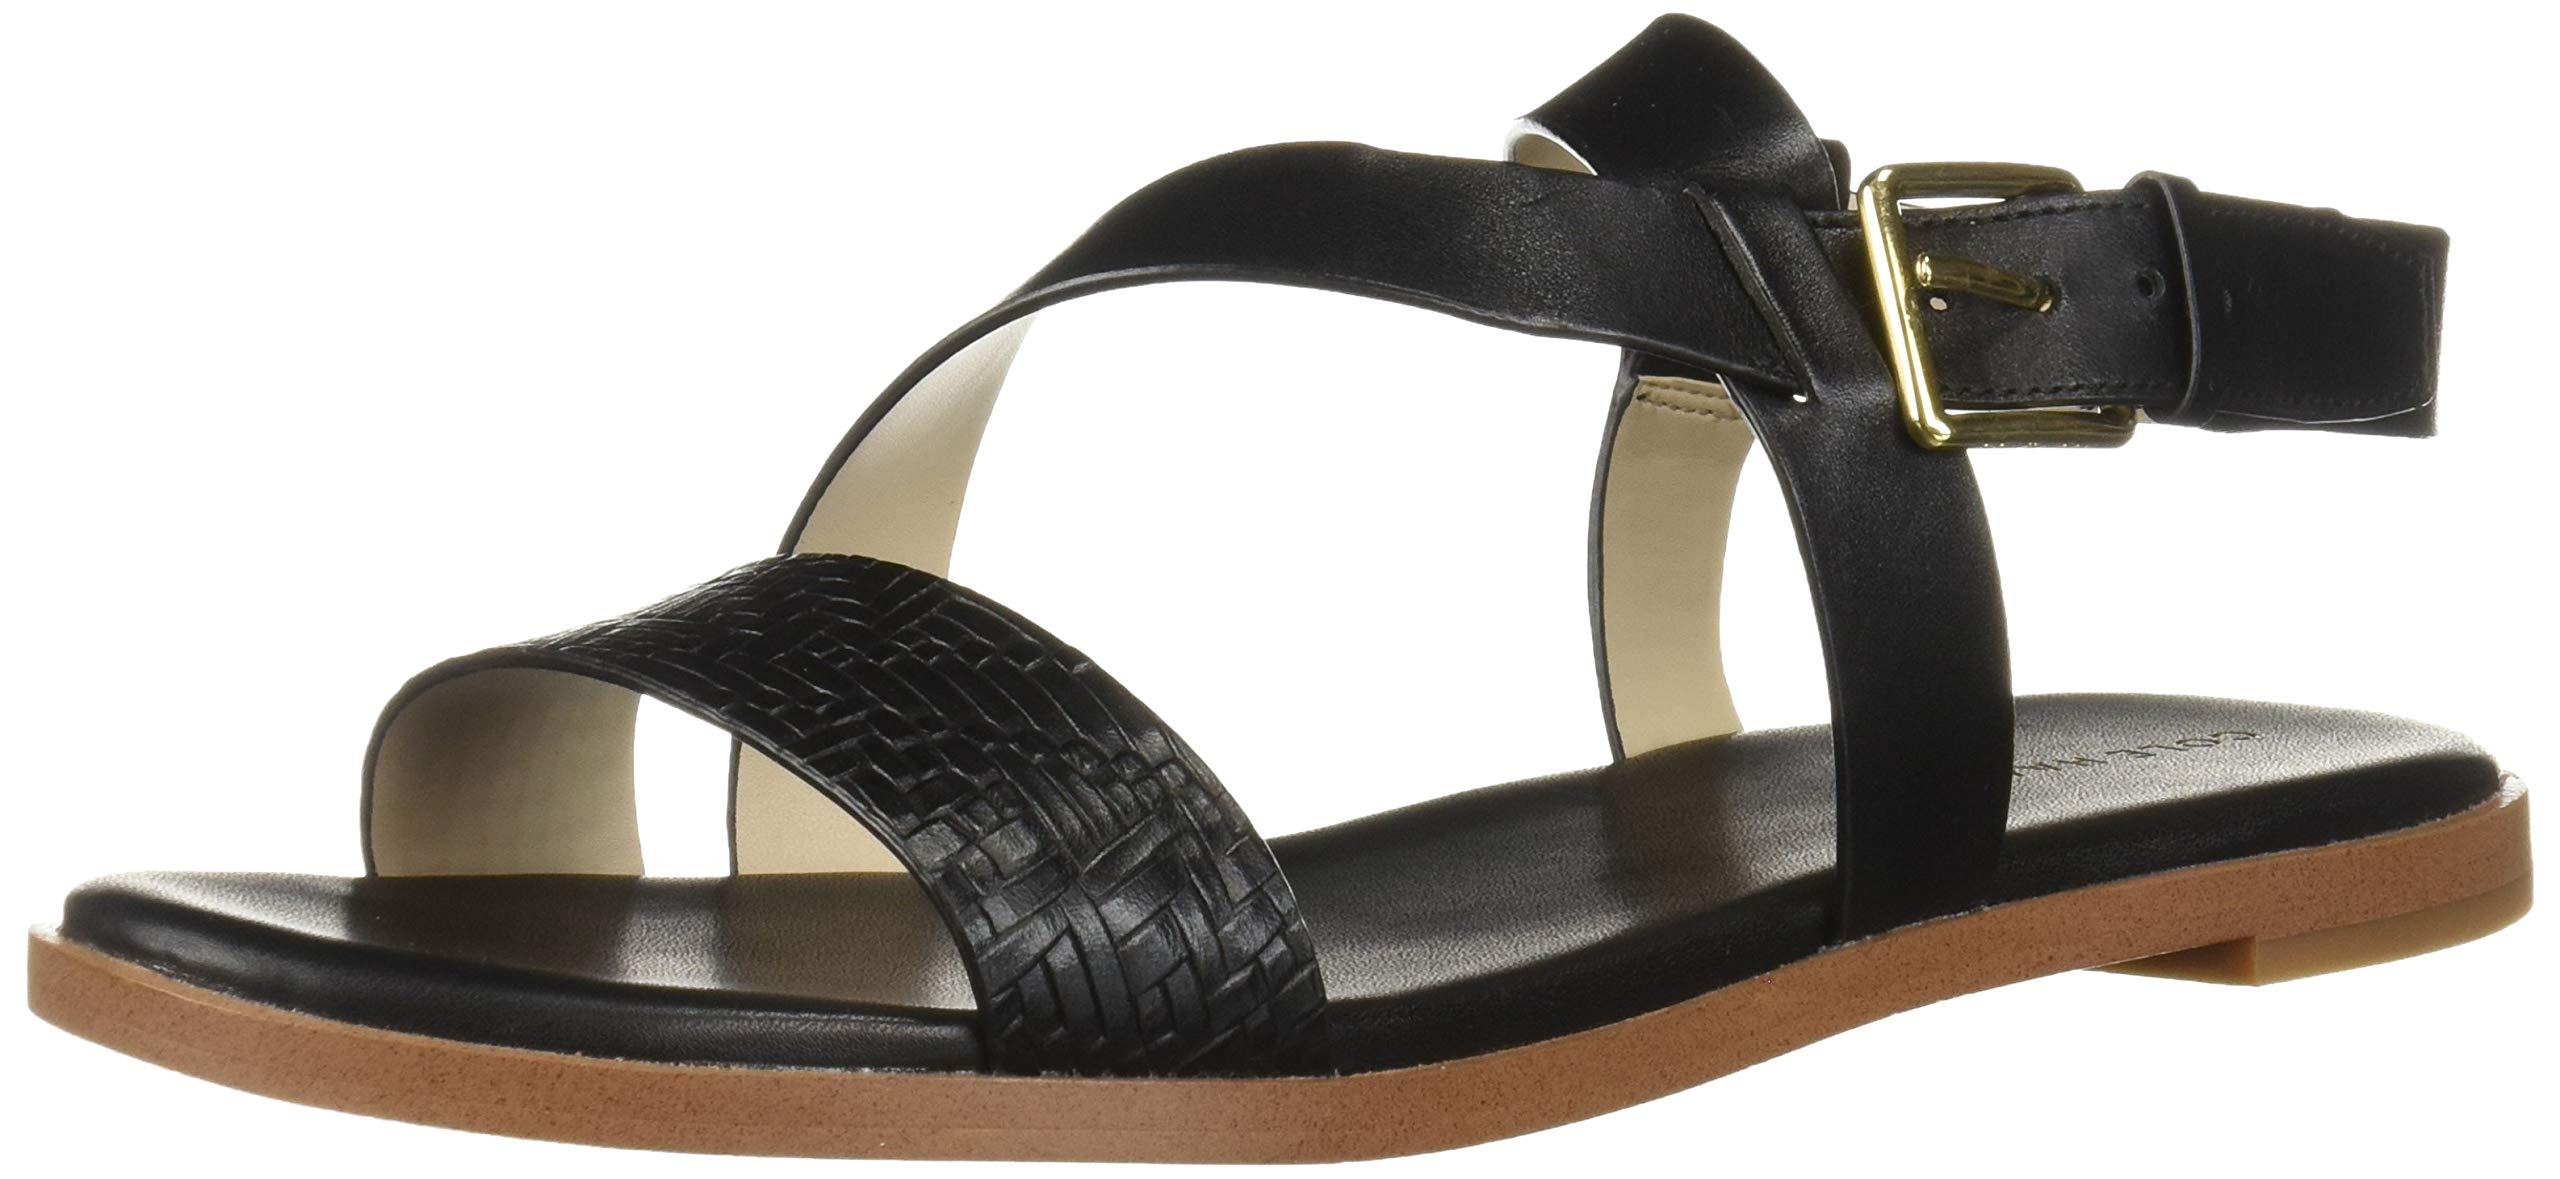 Details about   Cole Haan Women's Findra Strappy Sandal Ii Flat 